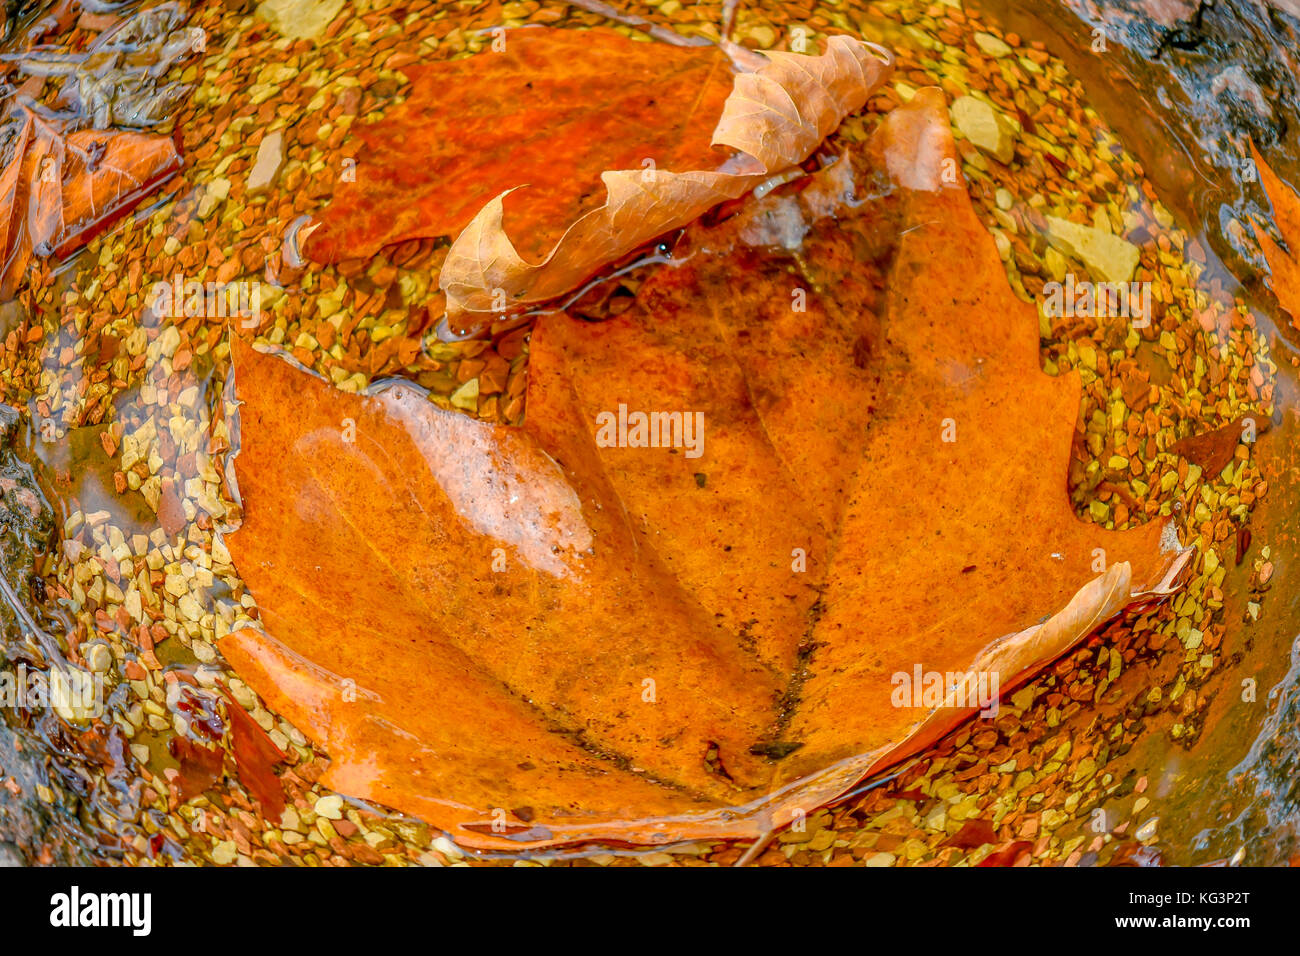 Autumn leaves in water, closeup. Swirling water, brown and yellow leaves and pebbles. Stock Photo